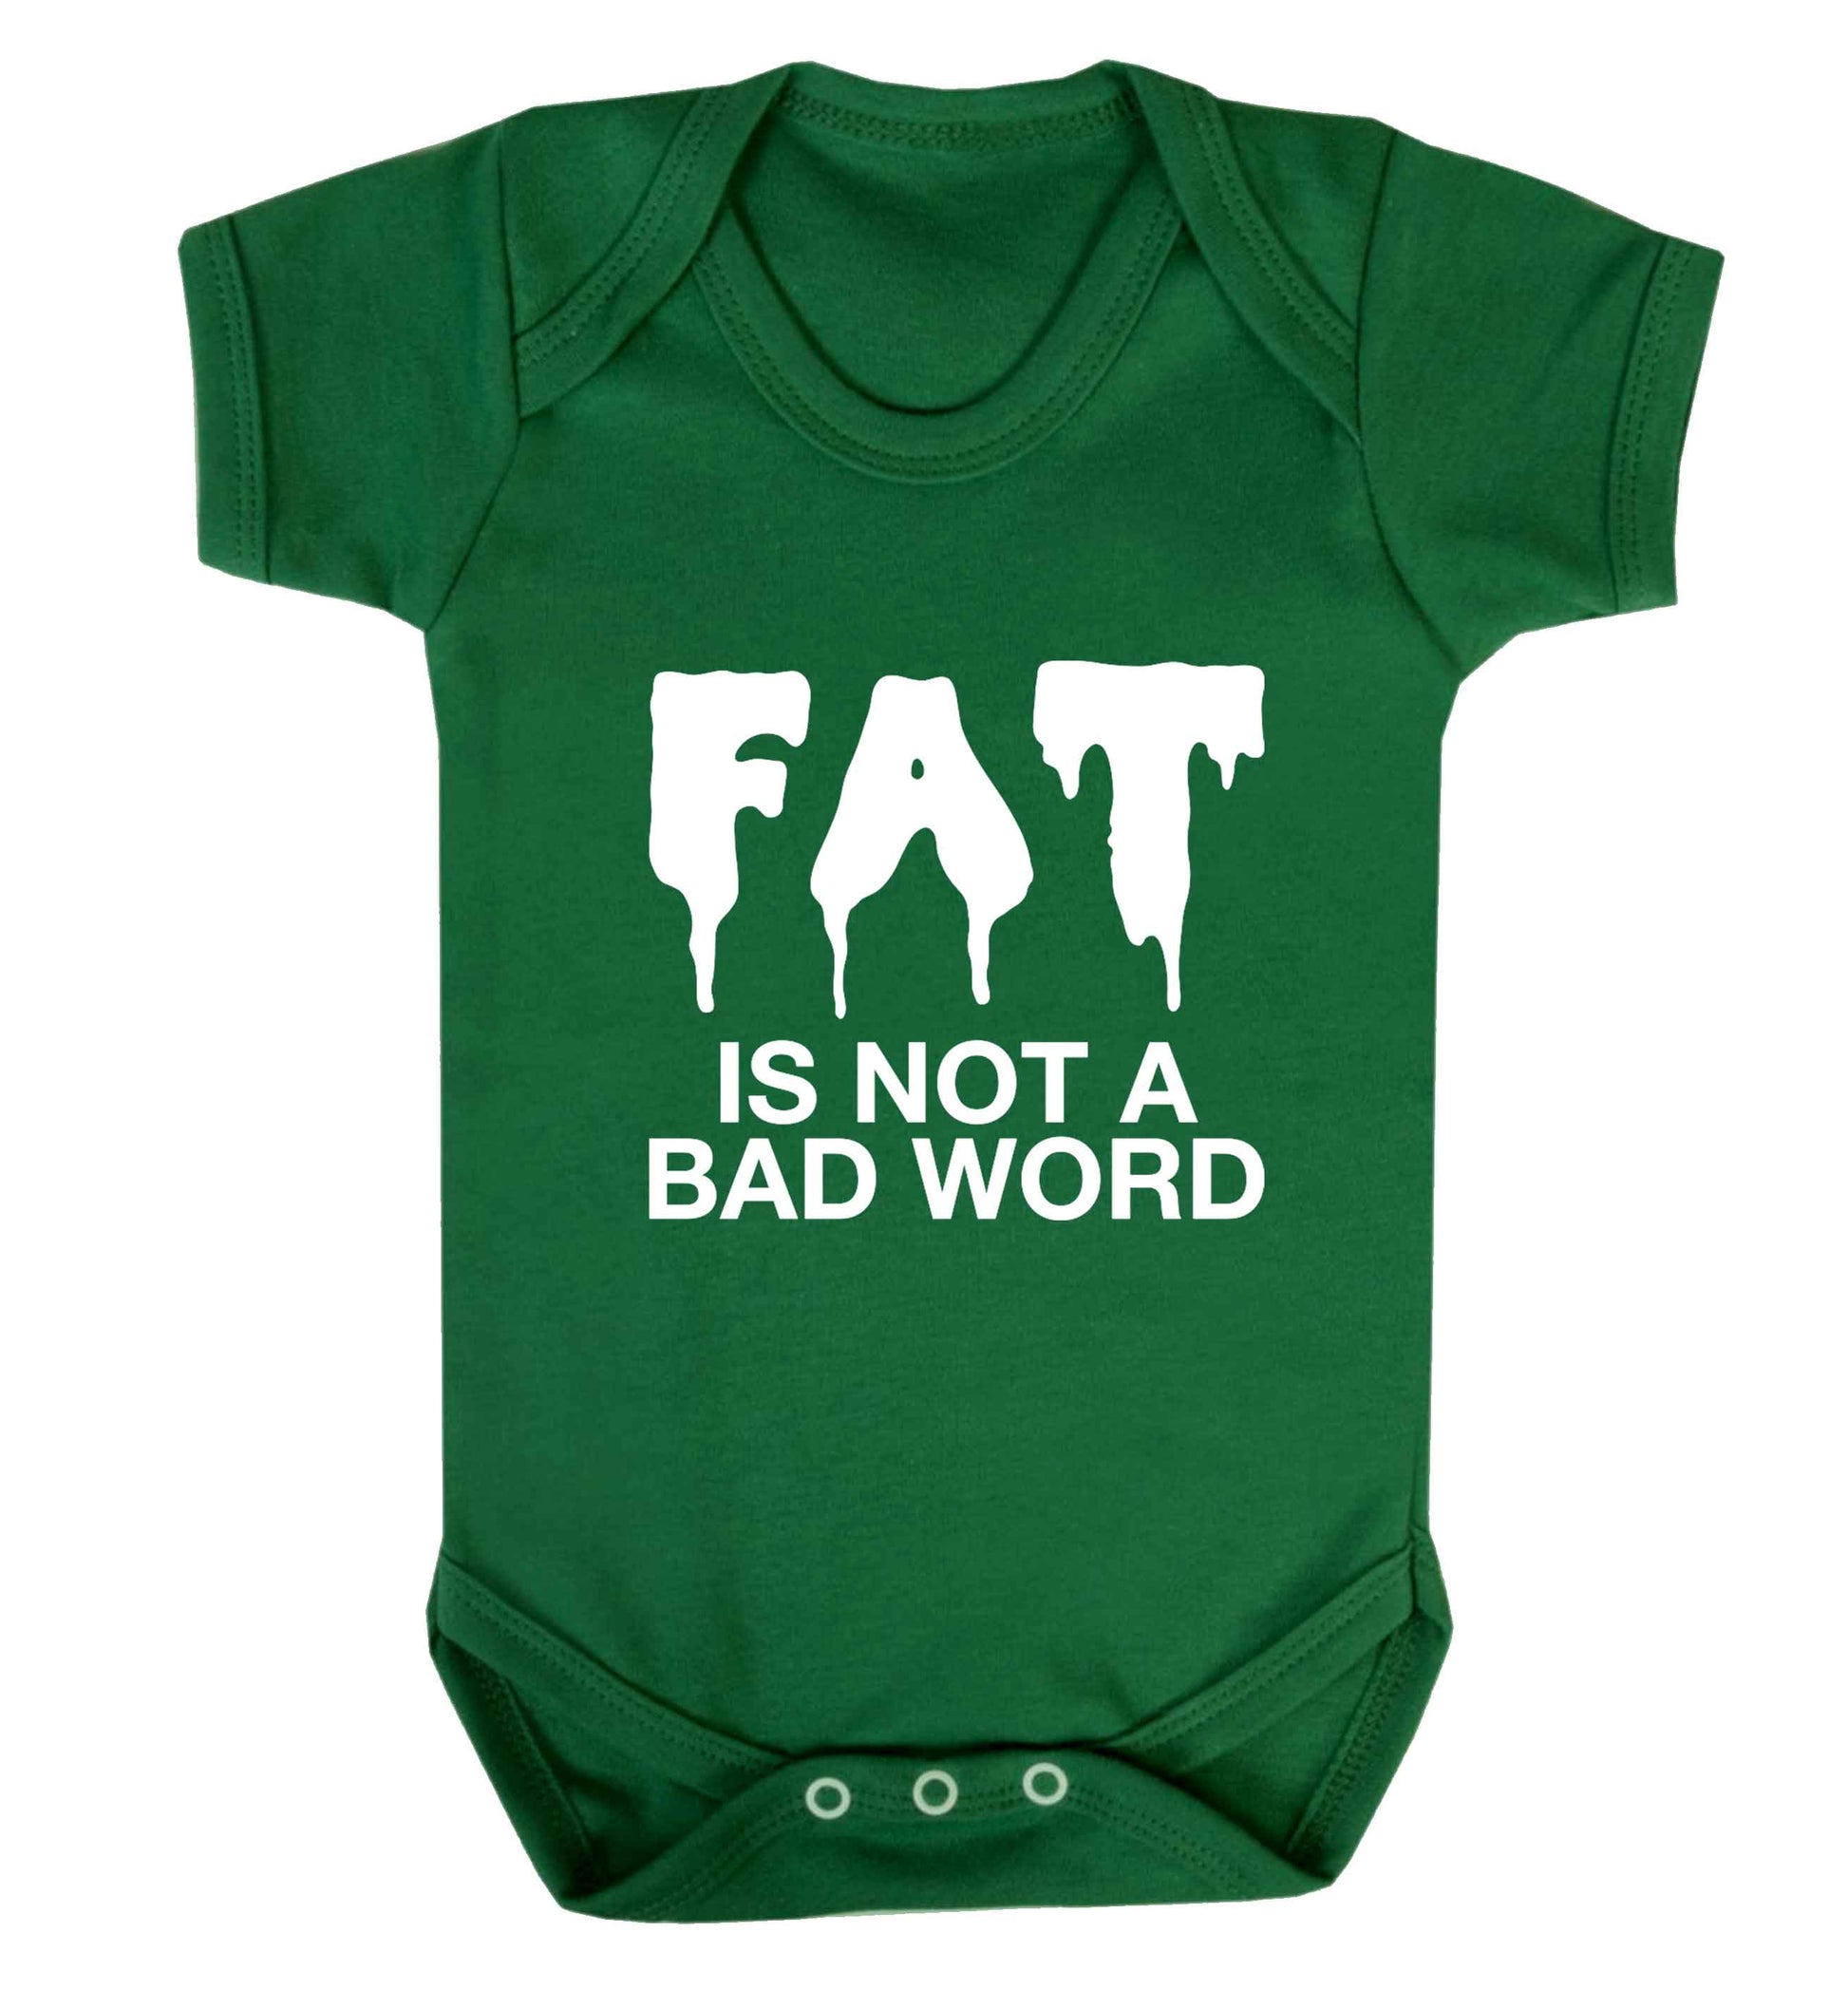 Fat is not a bad word baby vest green 18-24 months